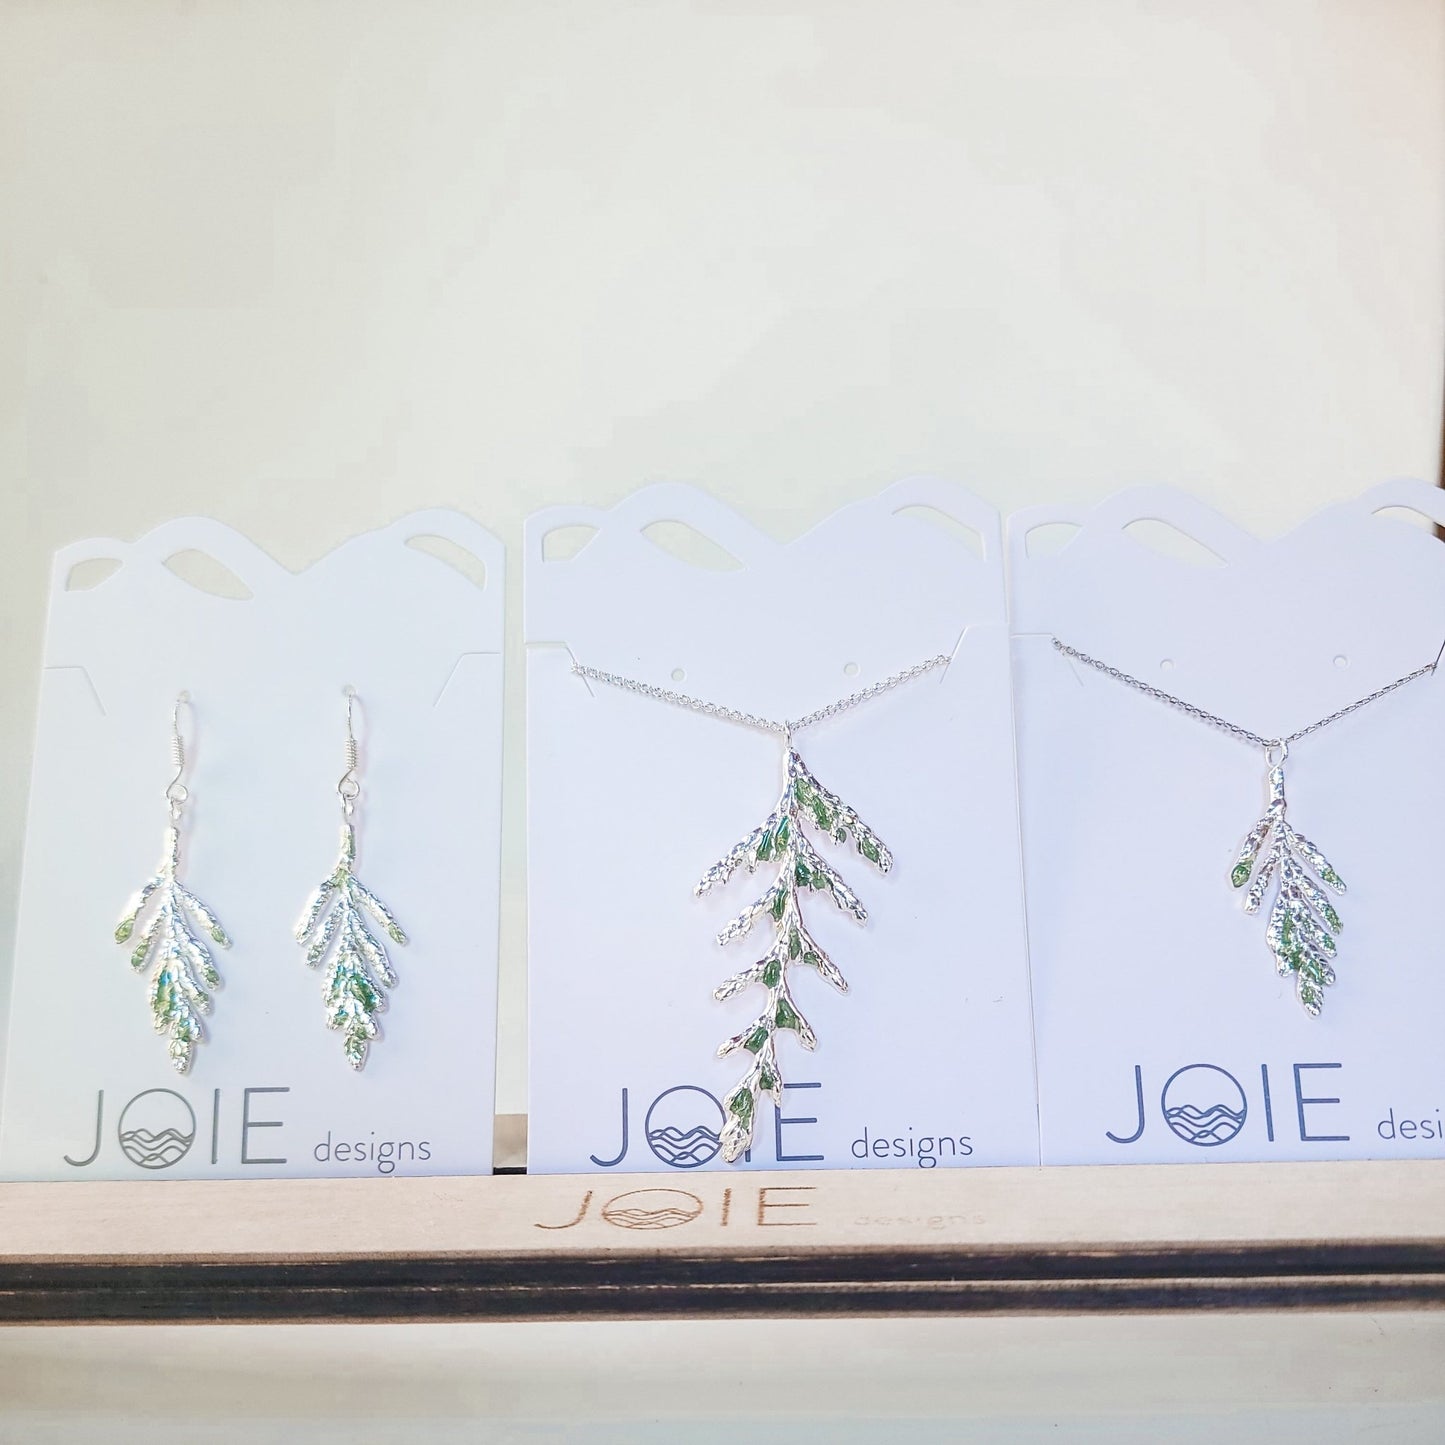 Silver petite  Arborvitae and Thuja Pendant necklaces and cedar leaf earrings  embellished with with emerald green resin detailing